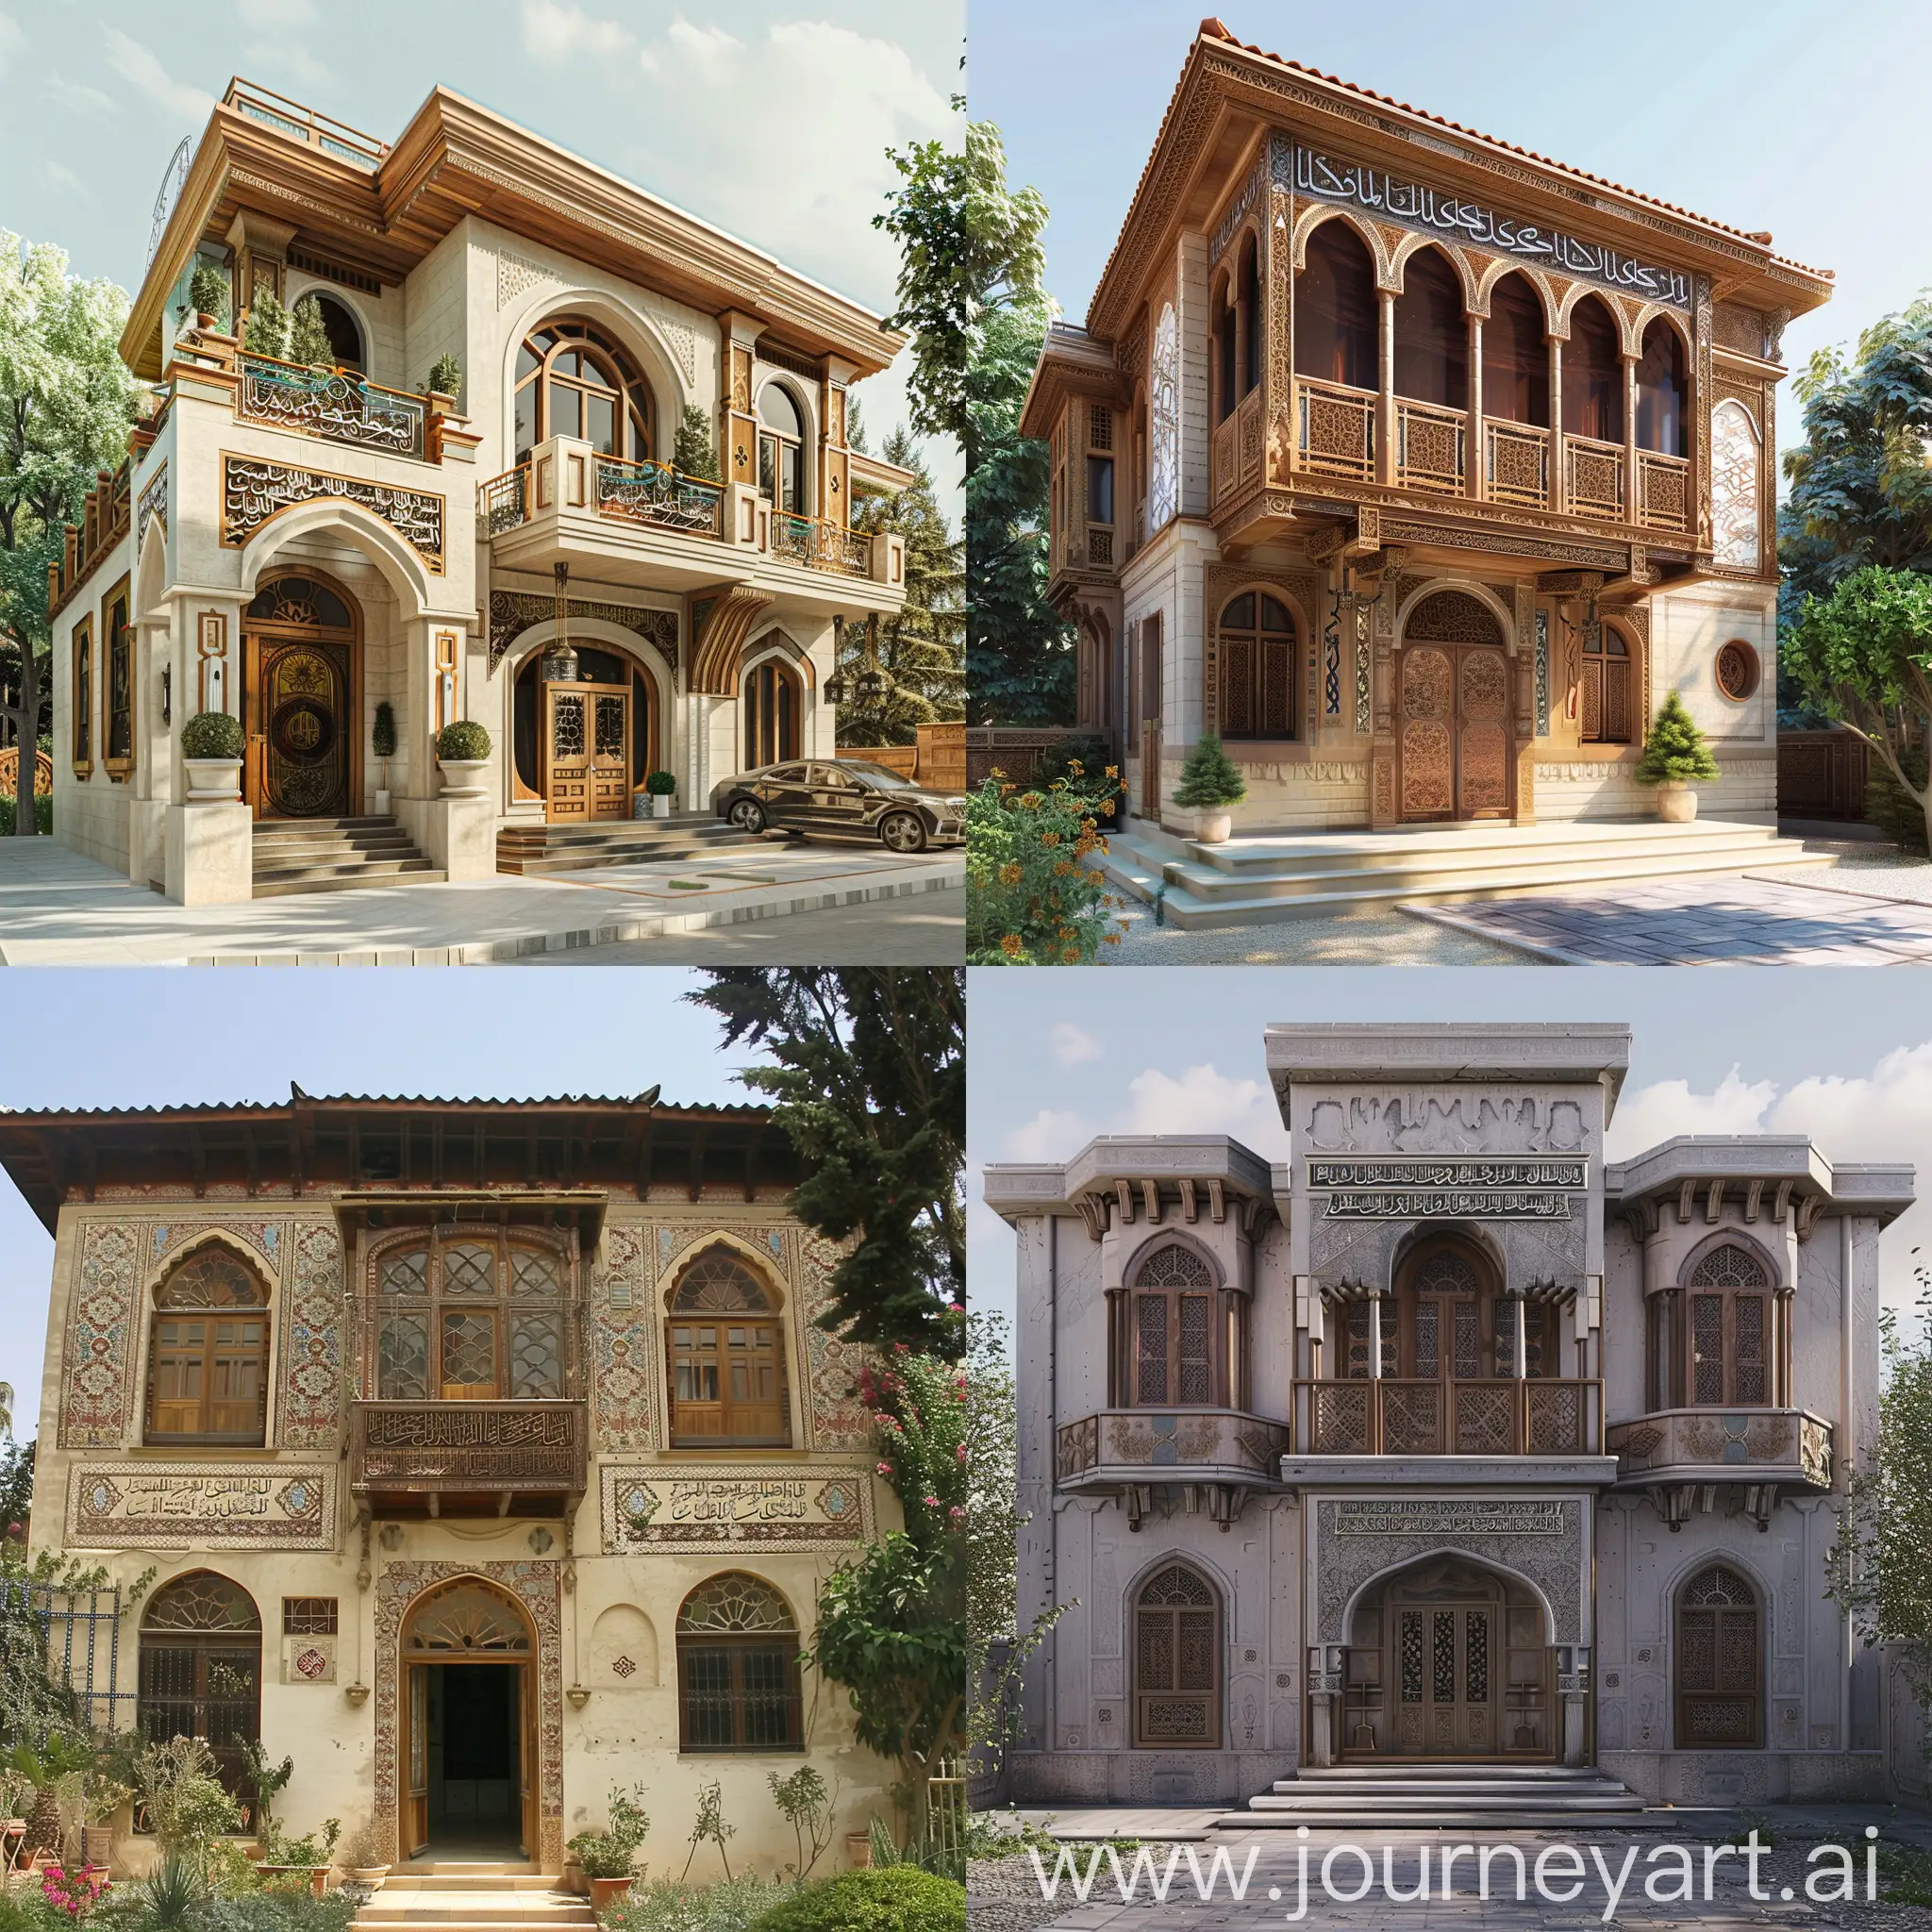 Islamic-Architecture-Majestic-House-of-Worship-with-Sacred-Inscriptions